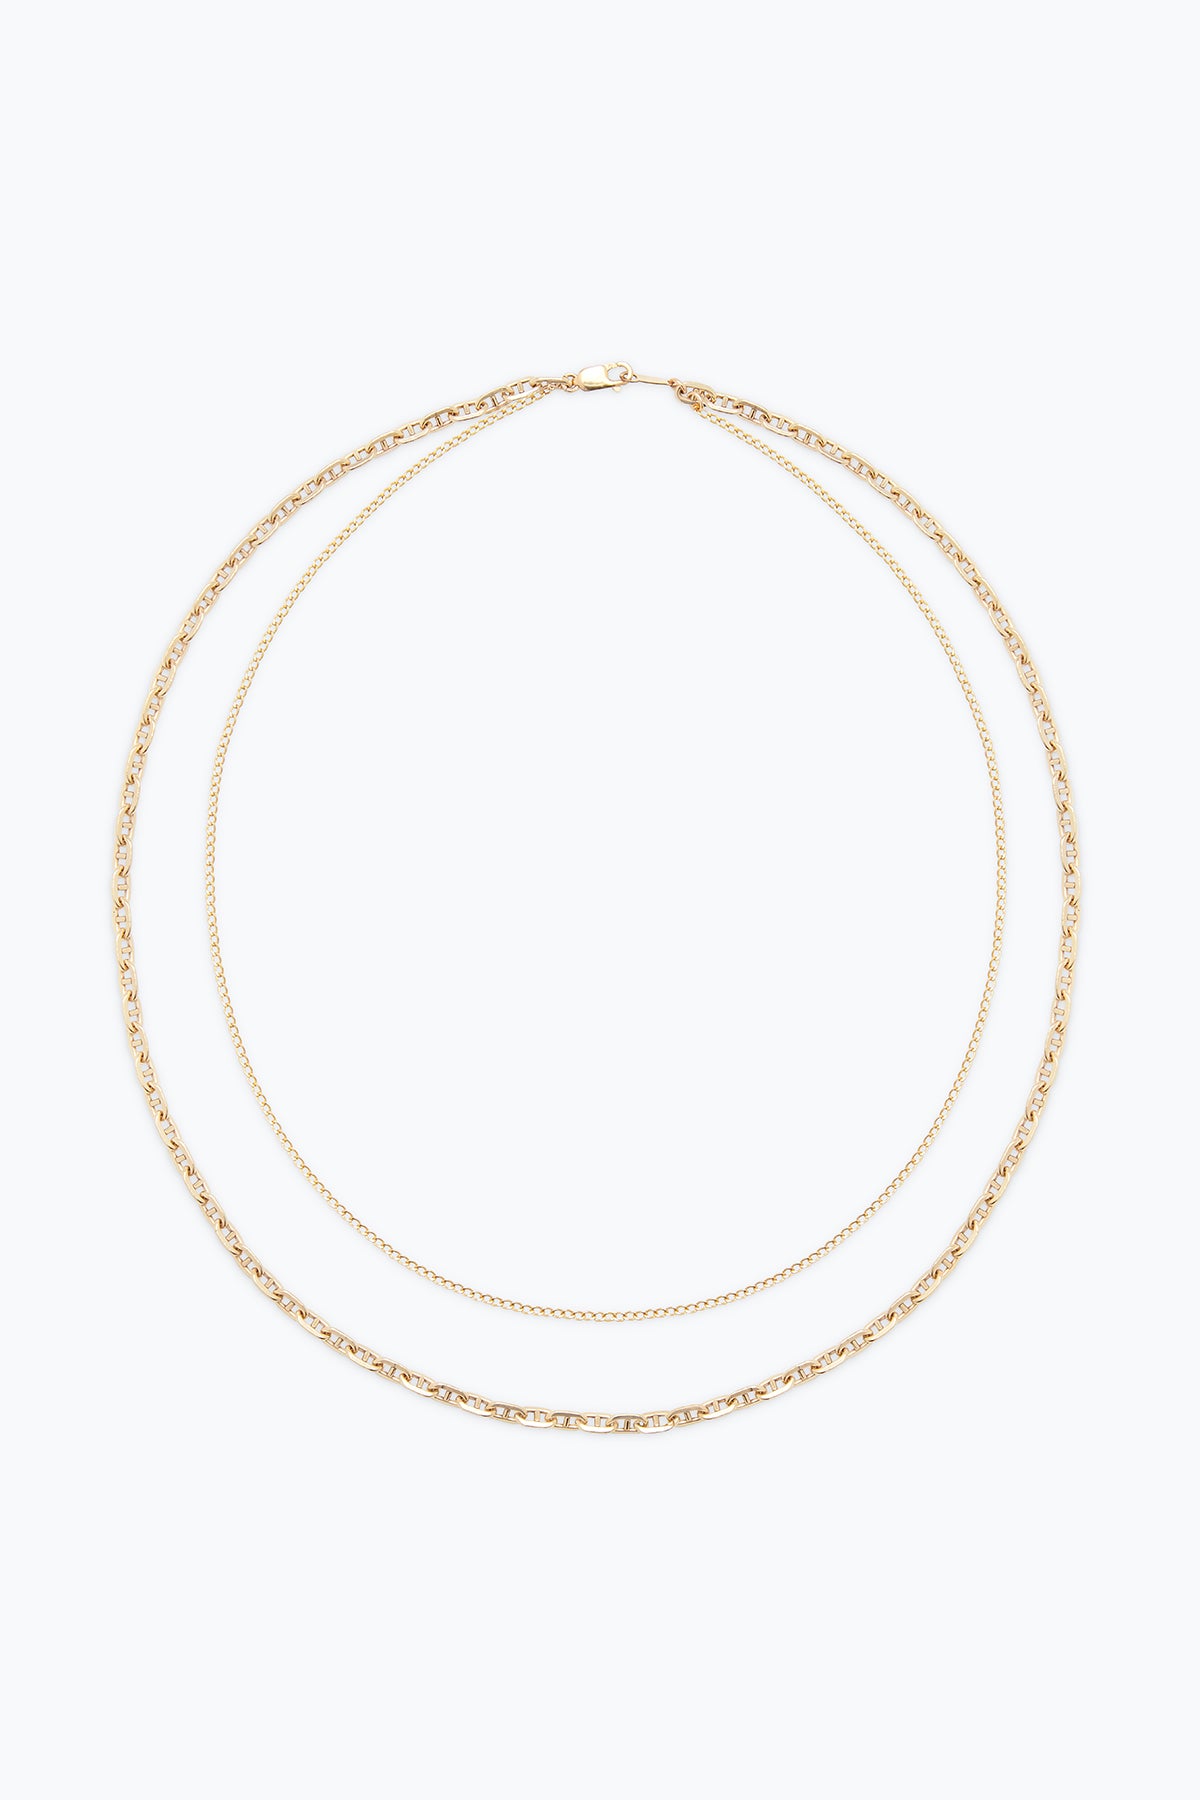 Dede Necklace by Phyllis & Rosie-23749661229249